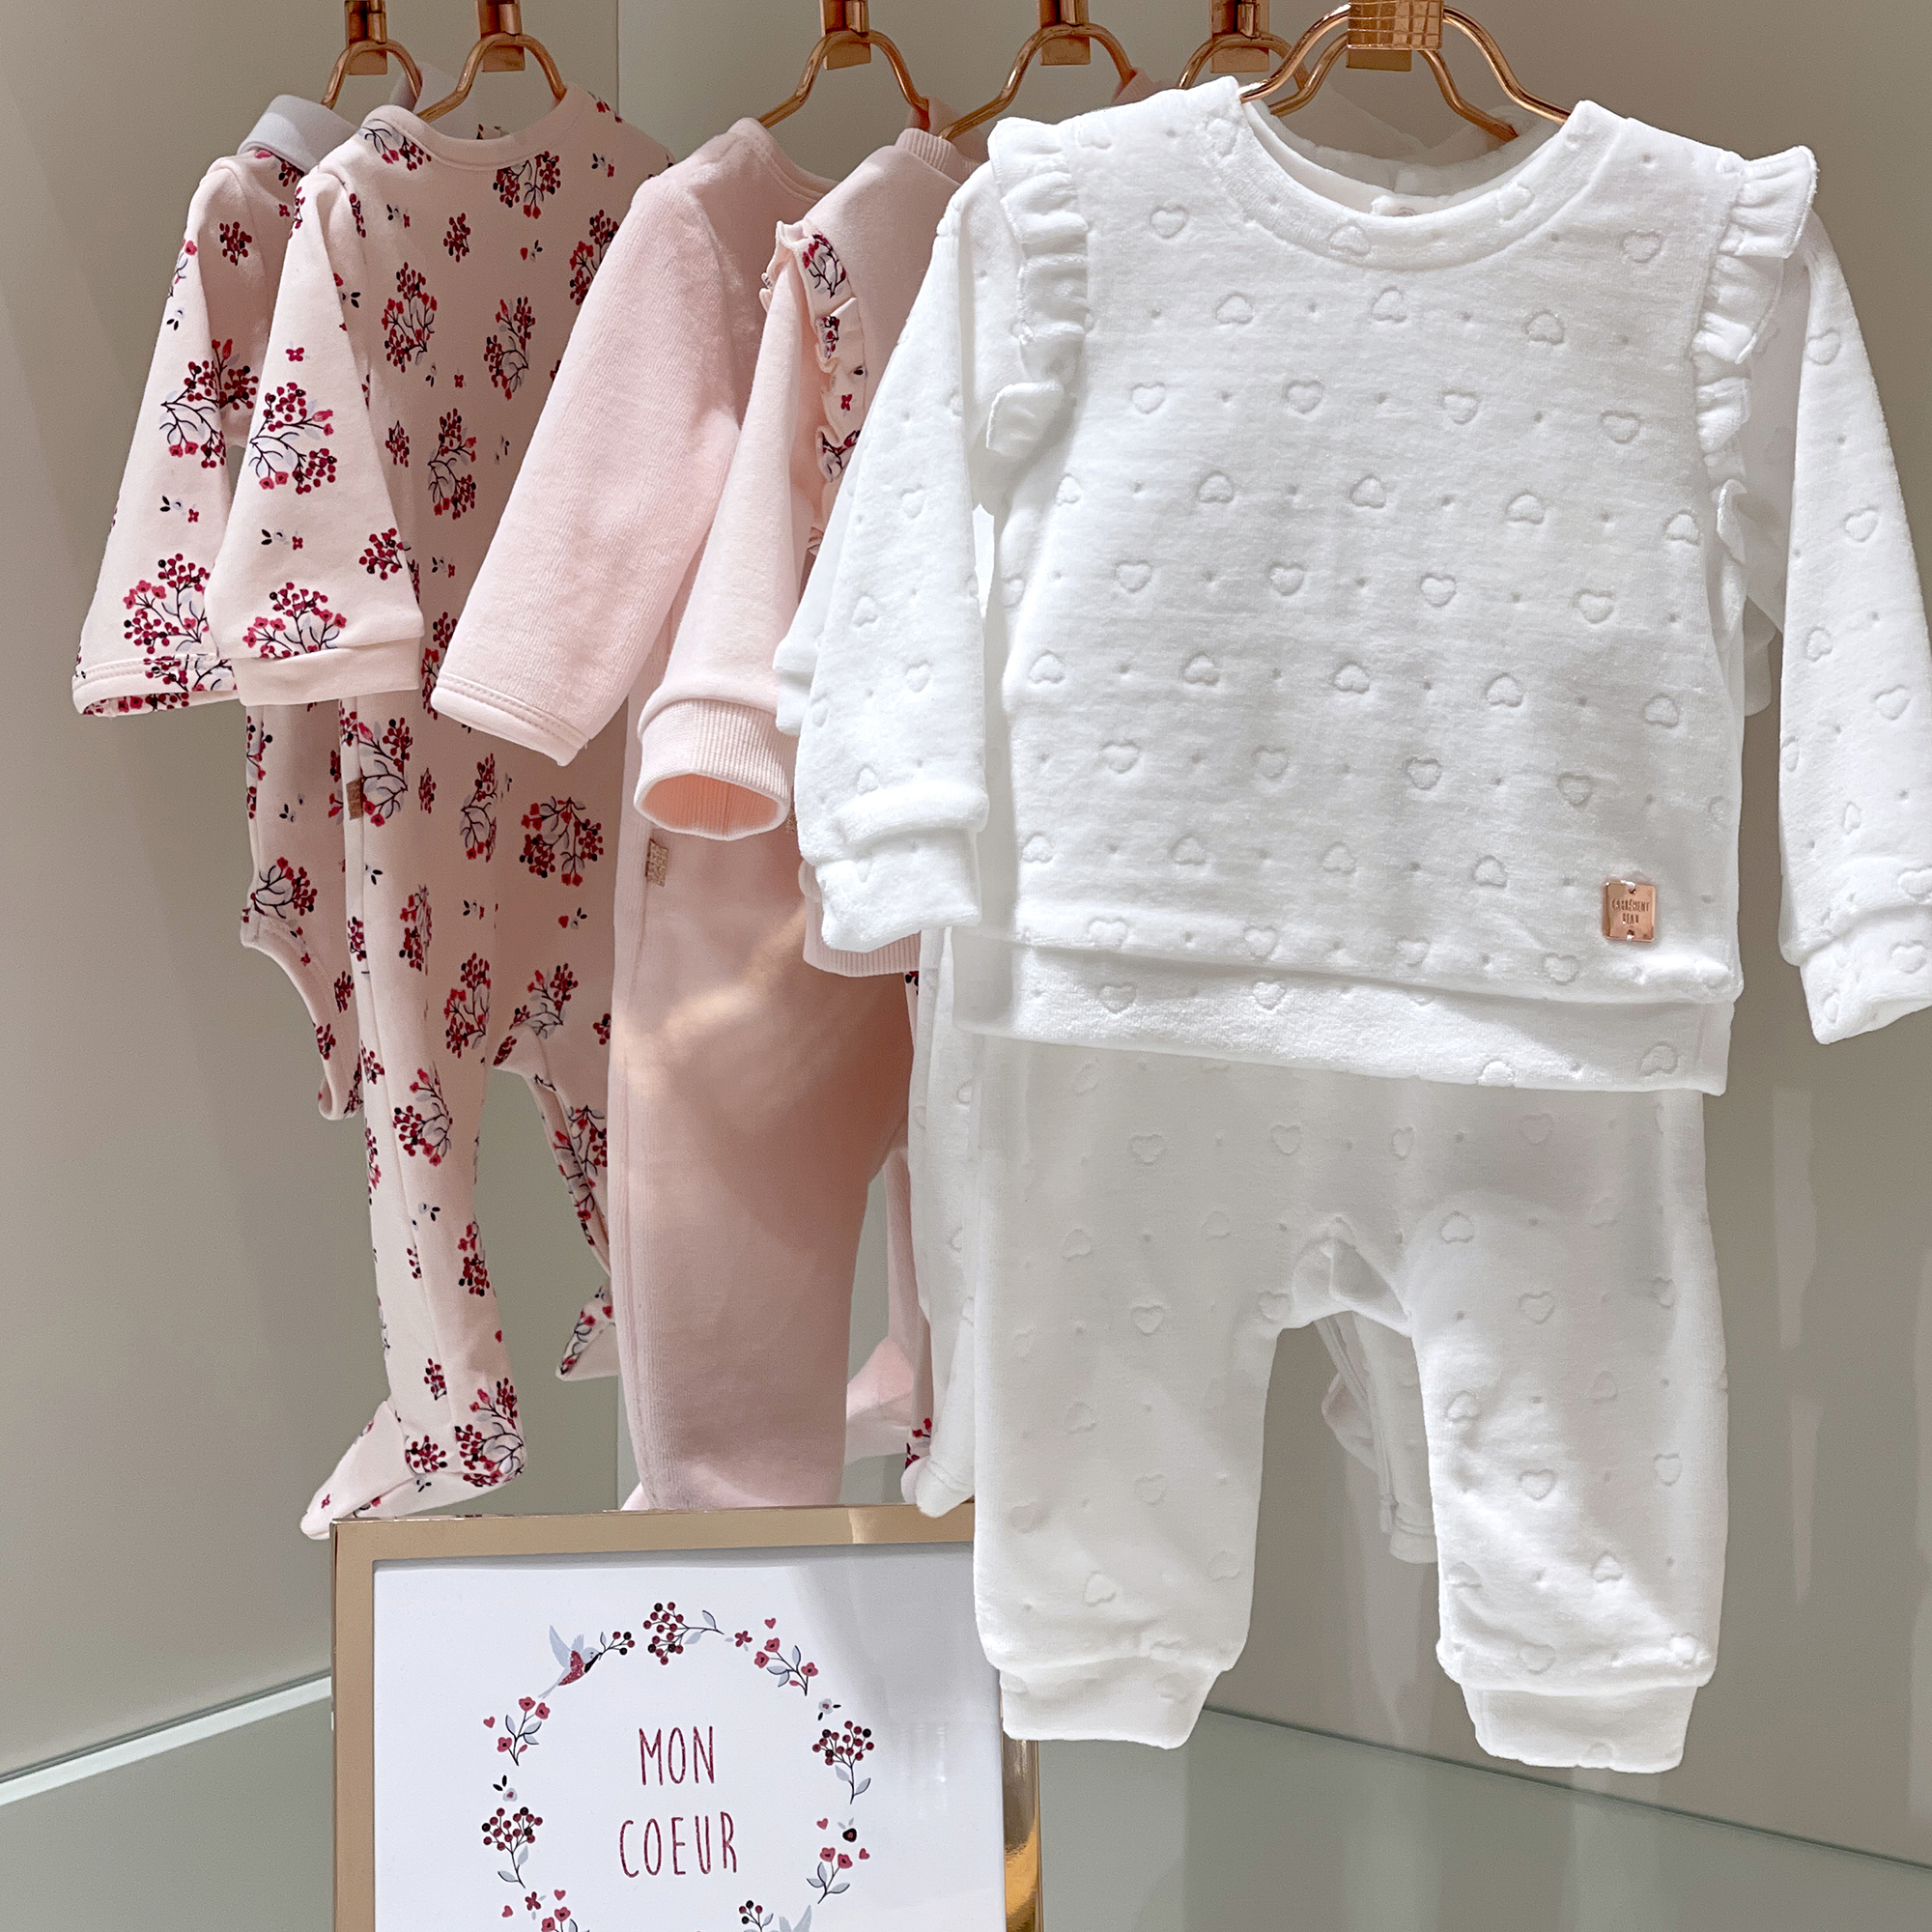 Jumper and bottoms outfit CARREMENT BEAU for GIRL